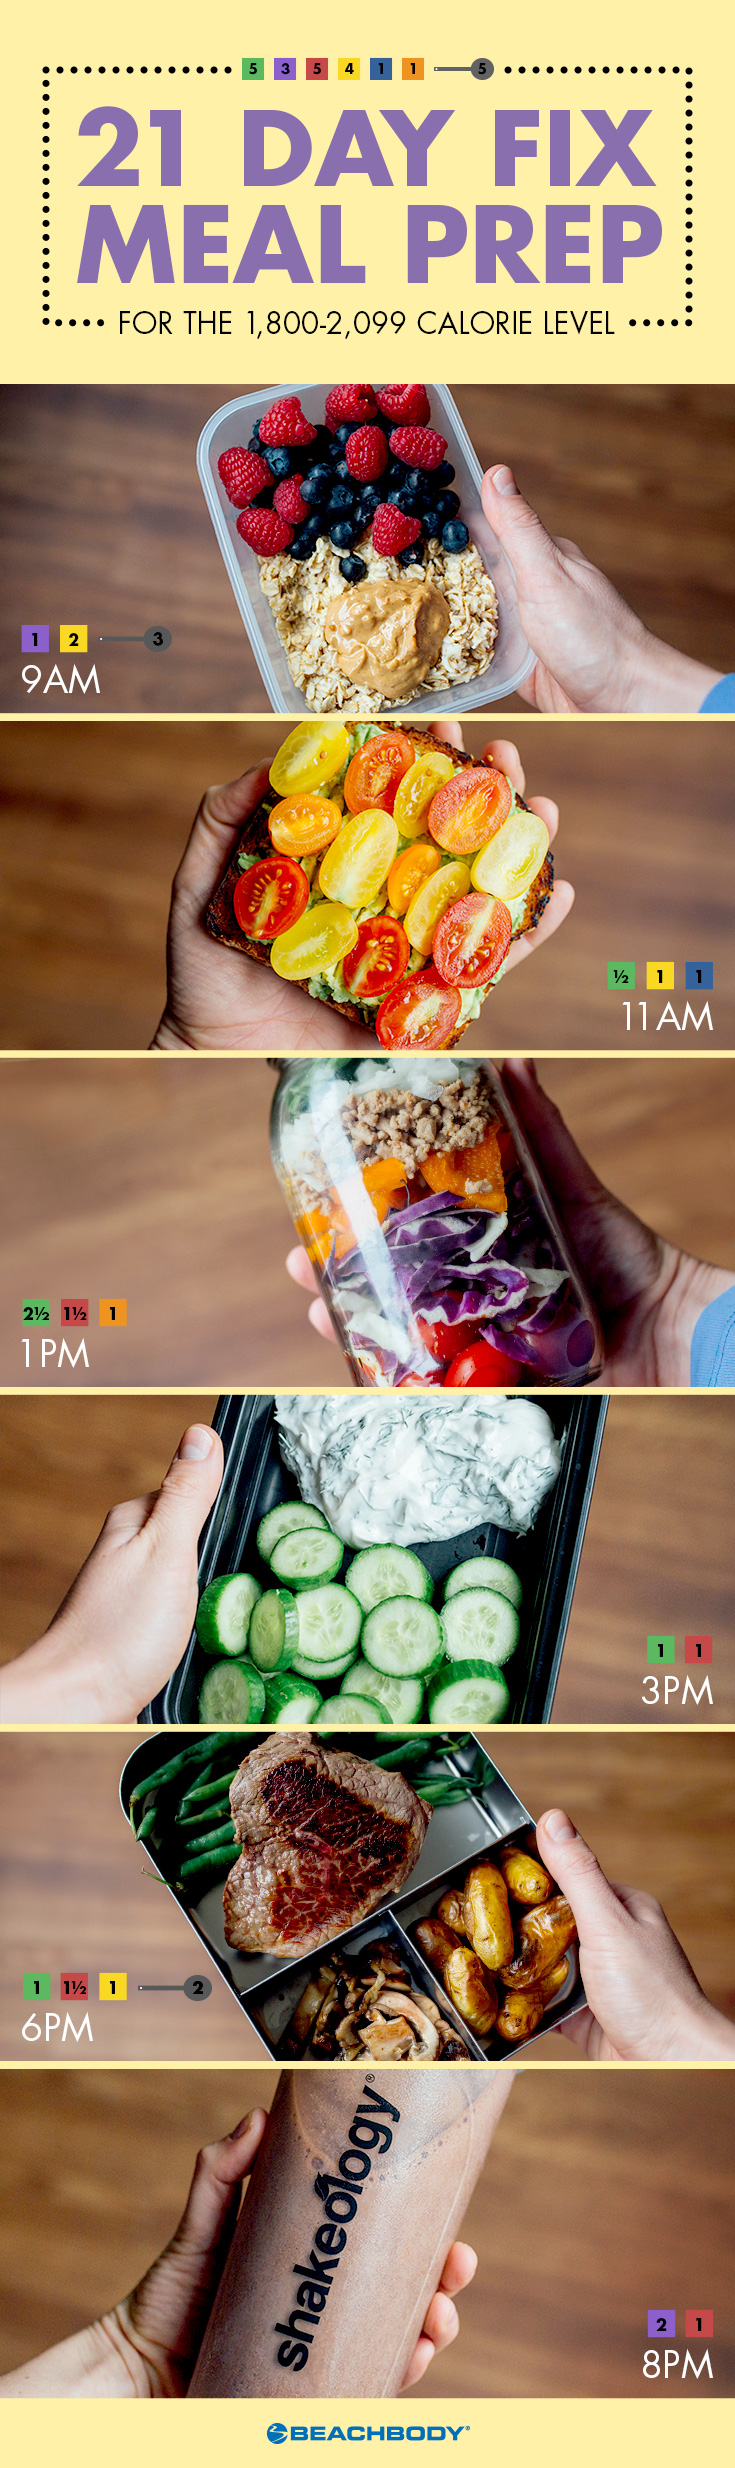 Quick and Simple Meal Prep, 21 Day Fix